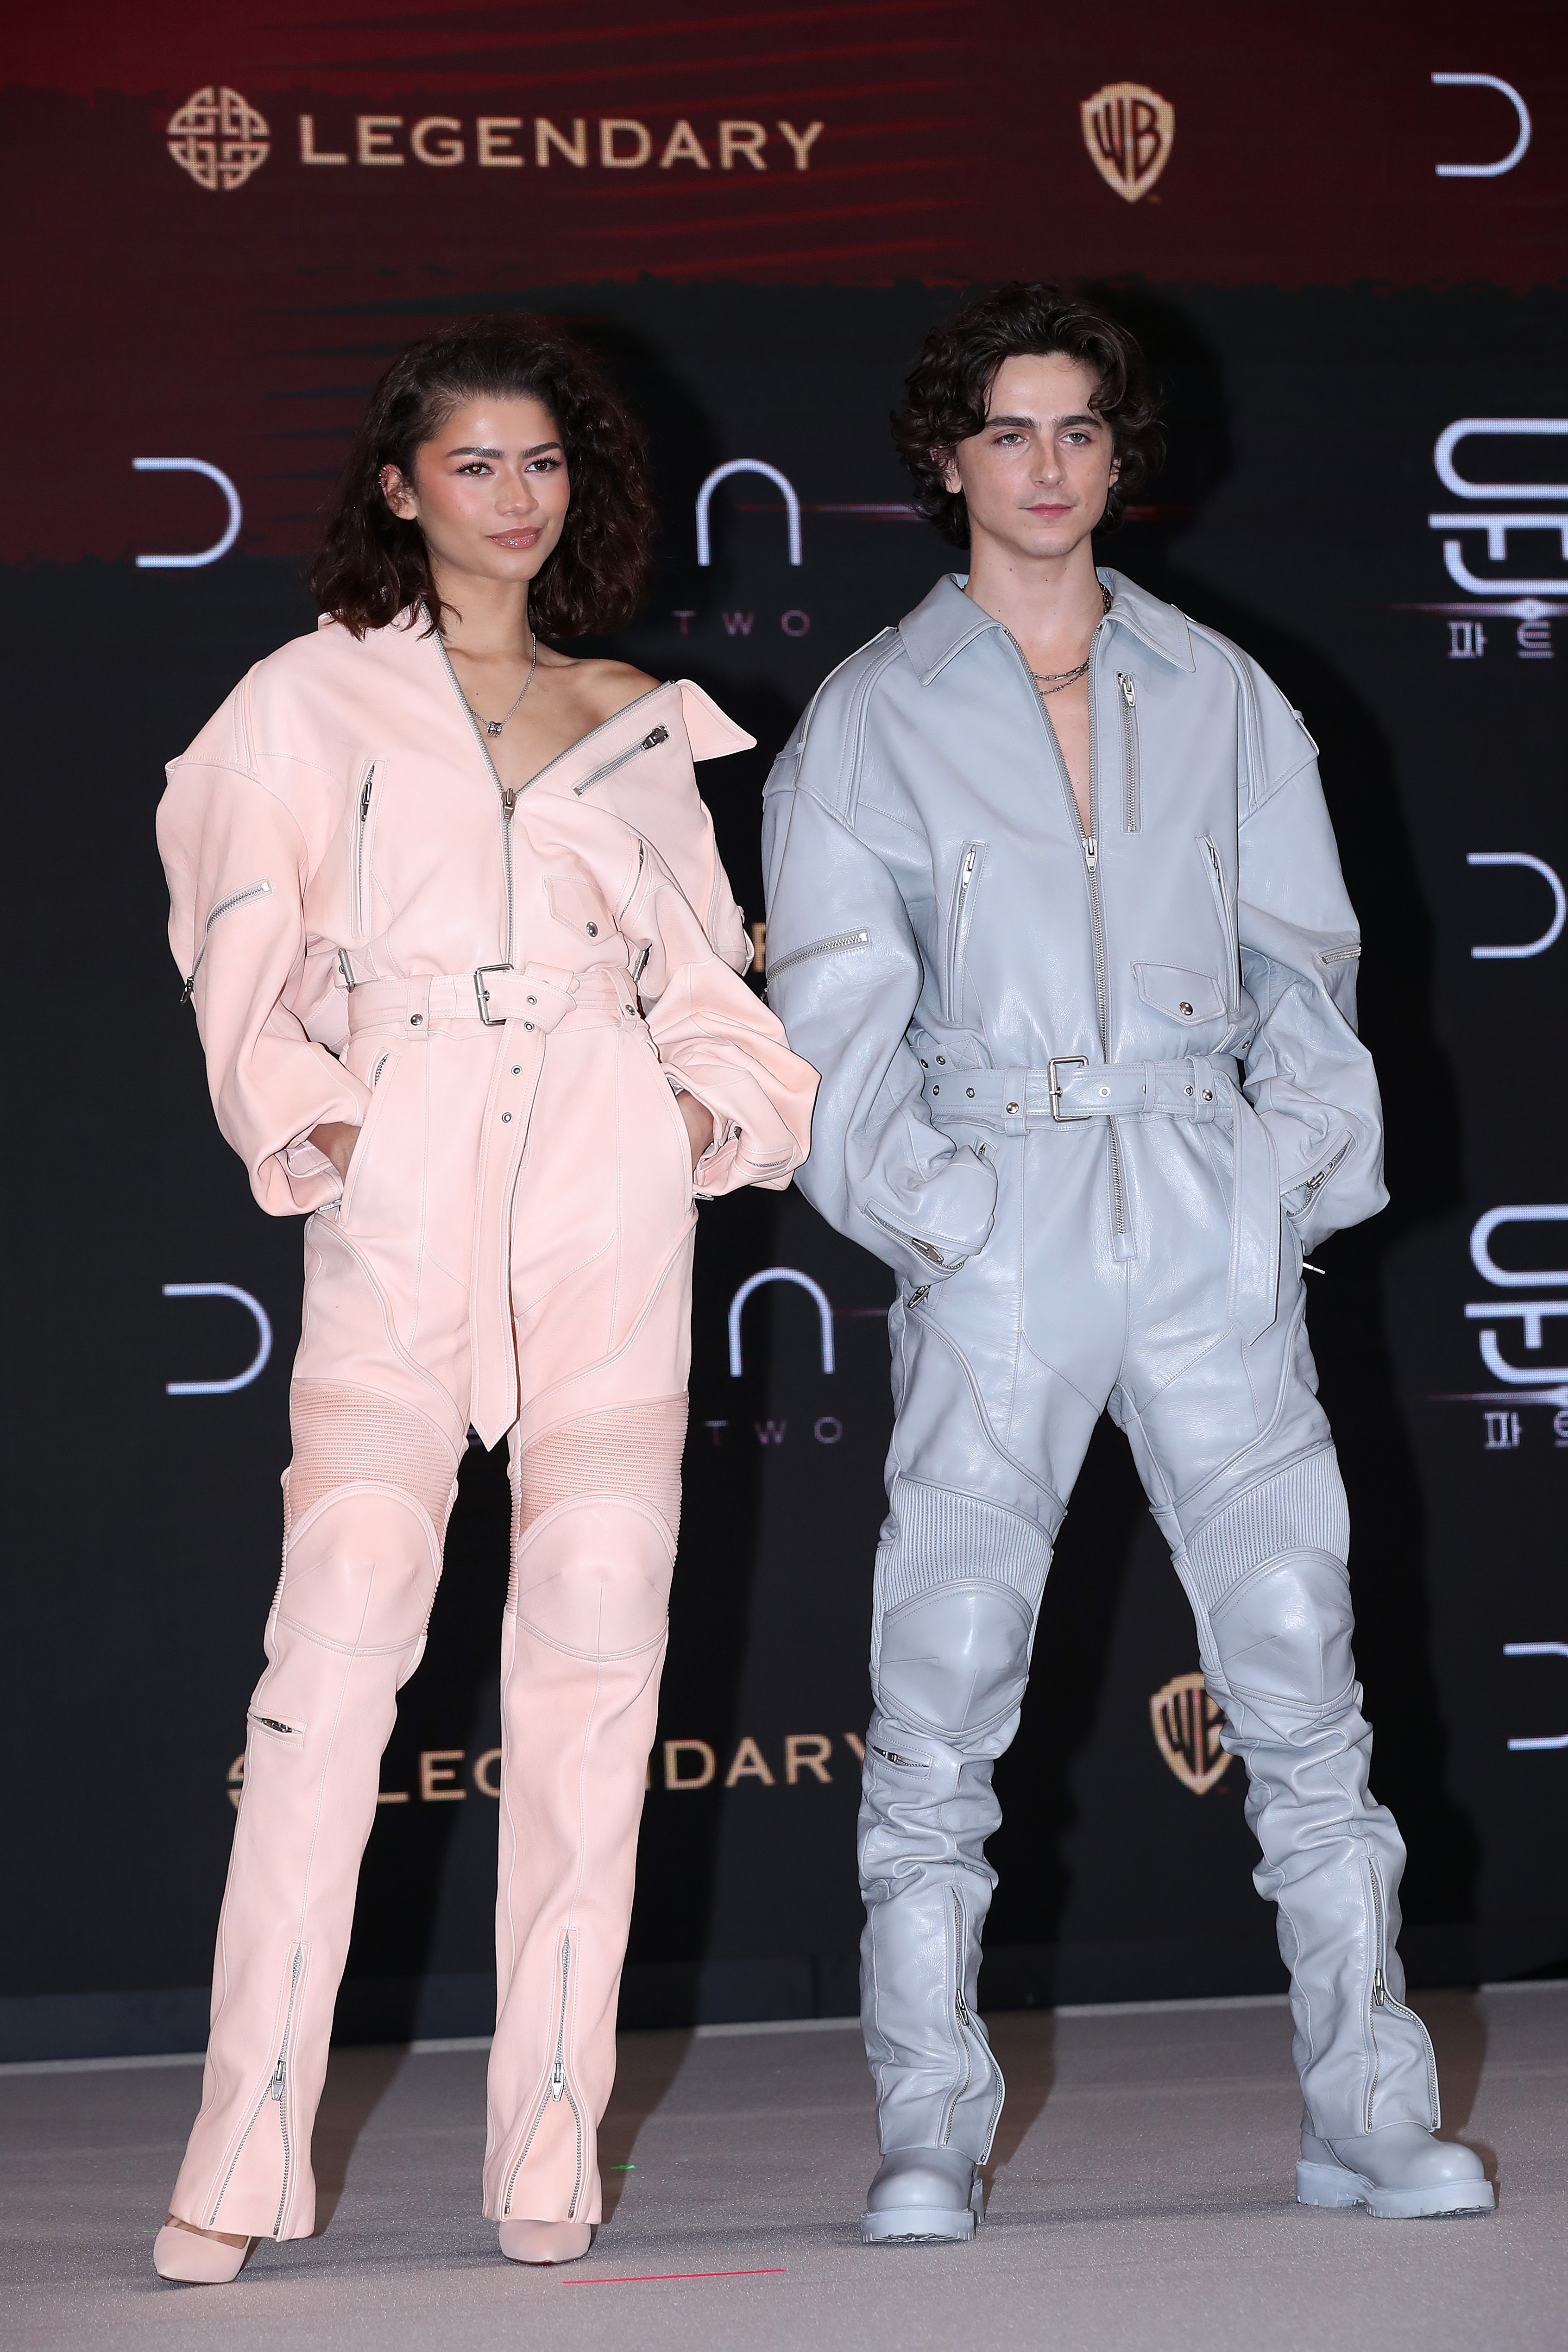 Many fans thought Timothée looked 'tired' in photos while promoting his new film, Dune: Part 2, with his co-star, Zendaya